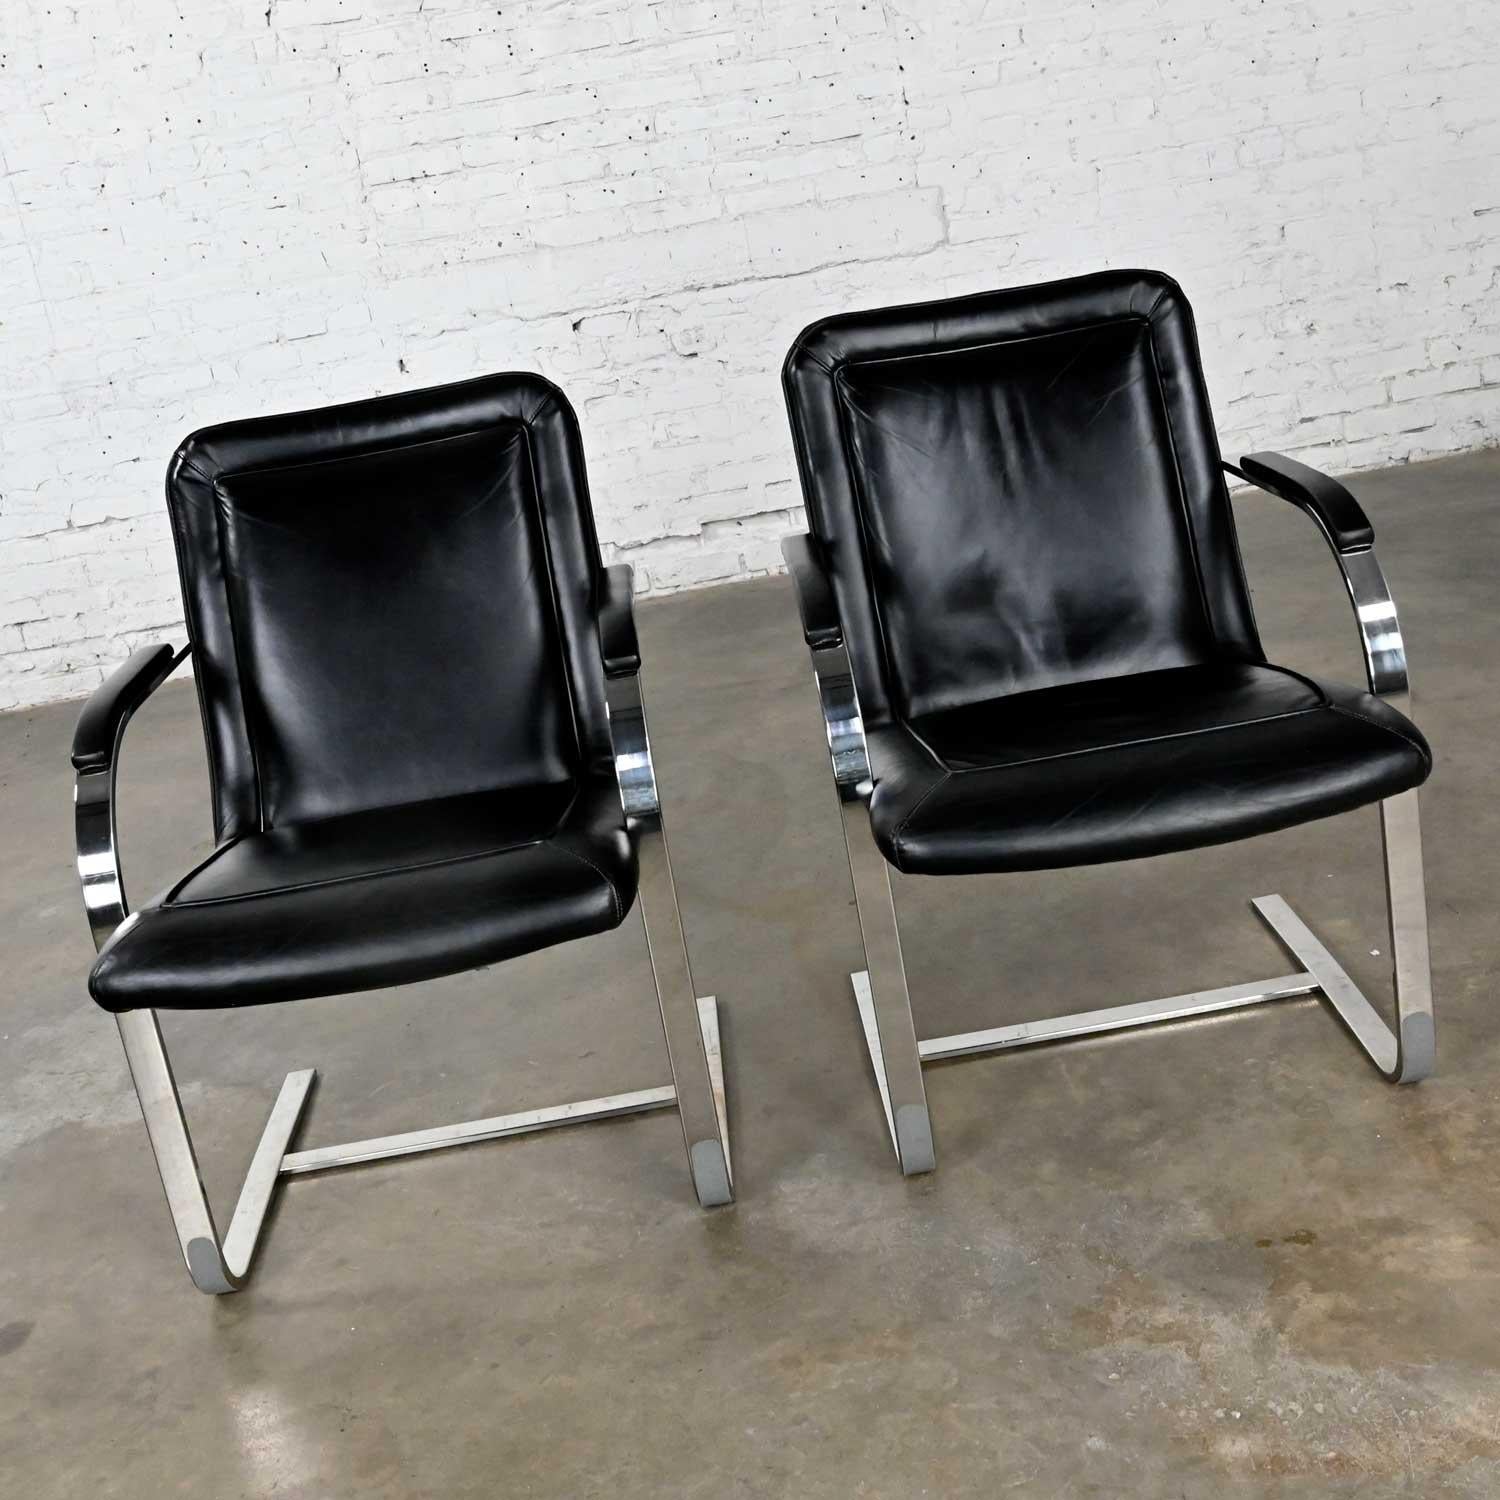 American Modern St Timothy Chair Cantilever Chairs Chrome Rectangle Tube & Black Leather For Sale